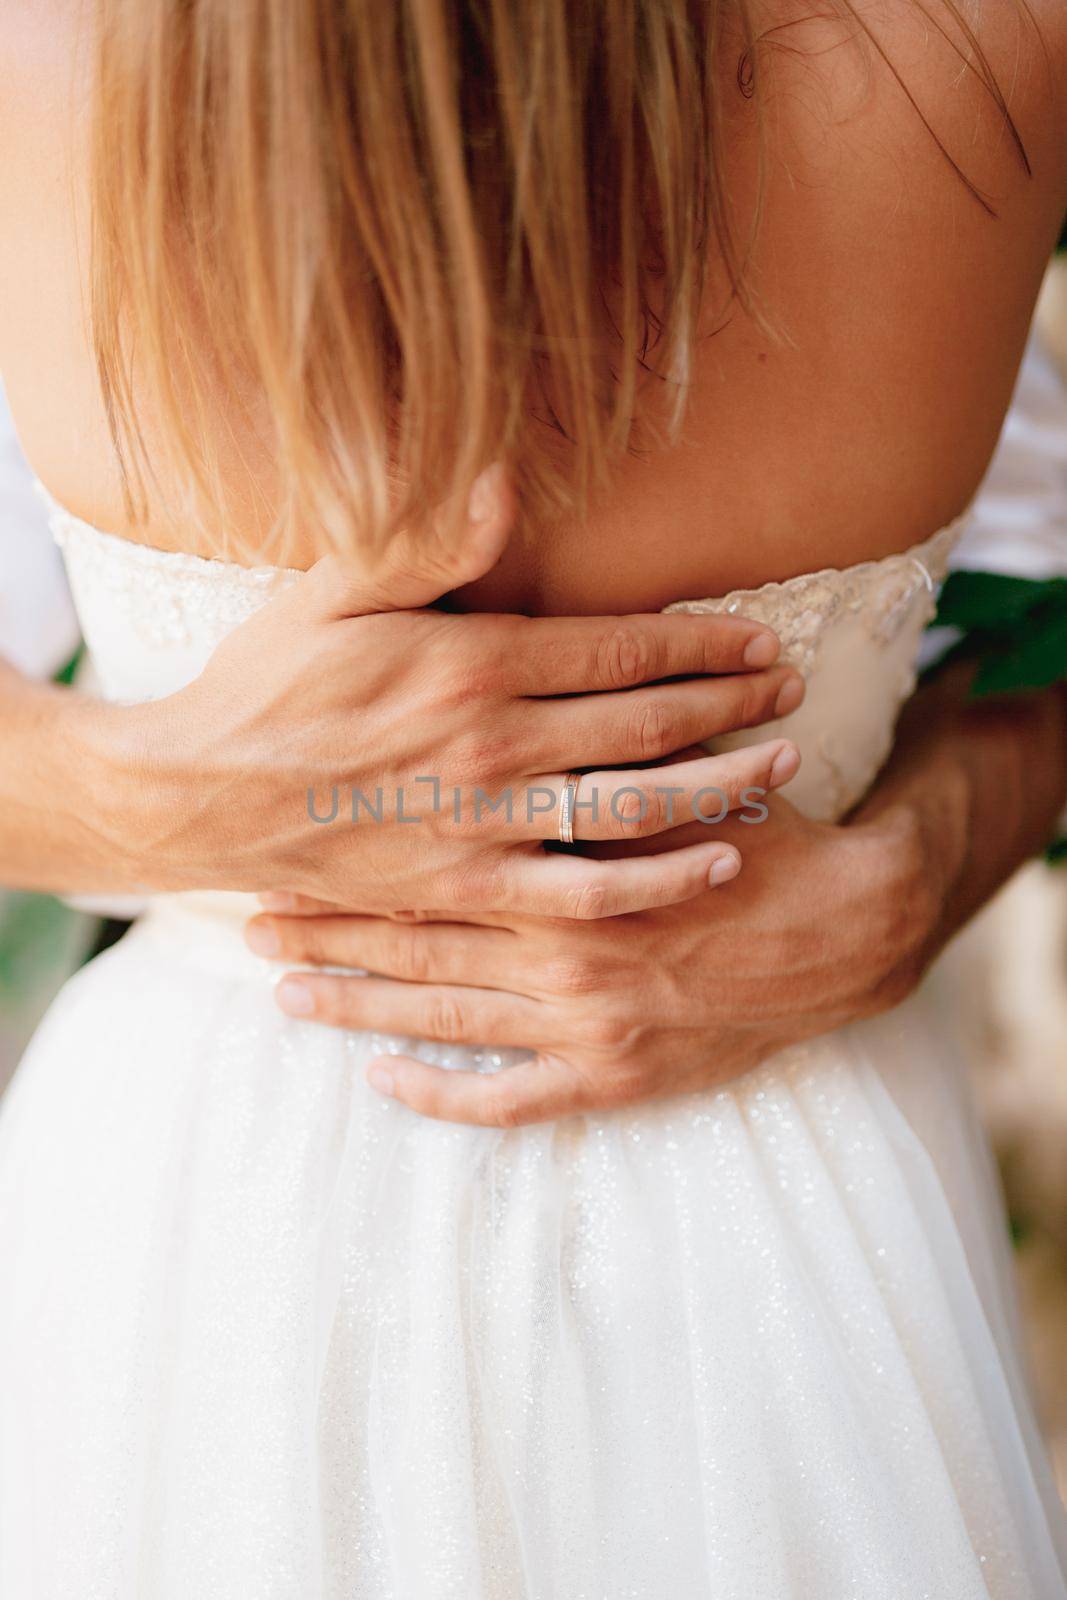 The groom gently hugs the bride and strokes her back with his hands, close-up . High quality photo